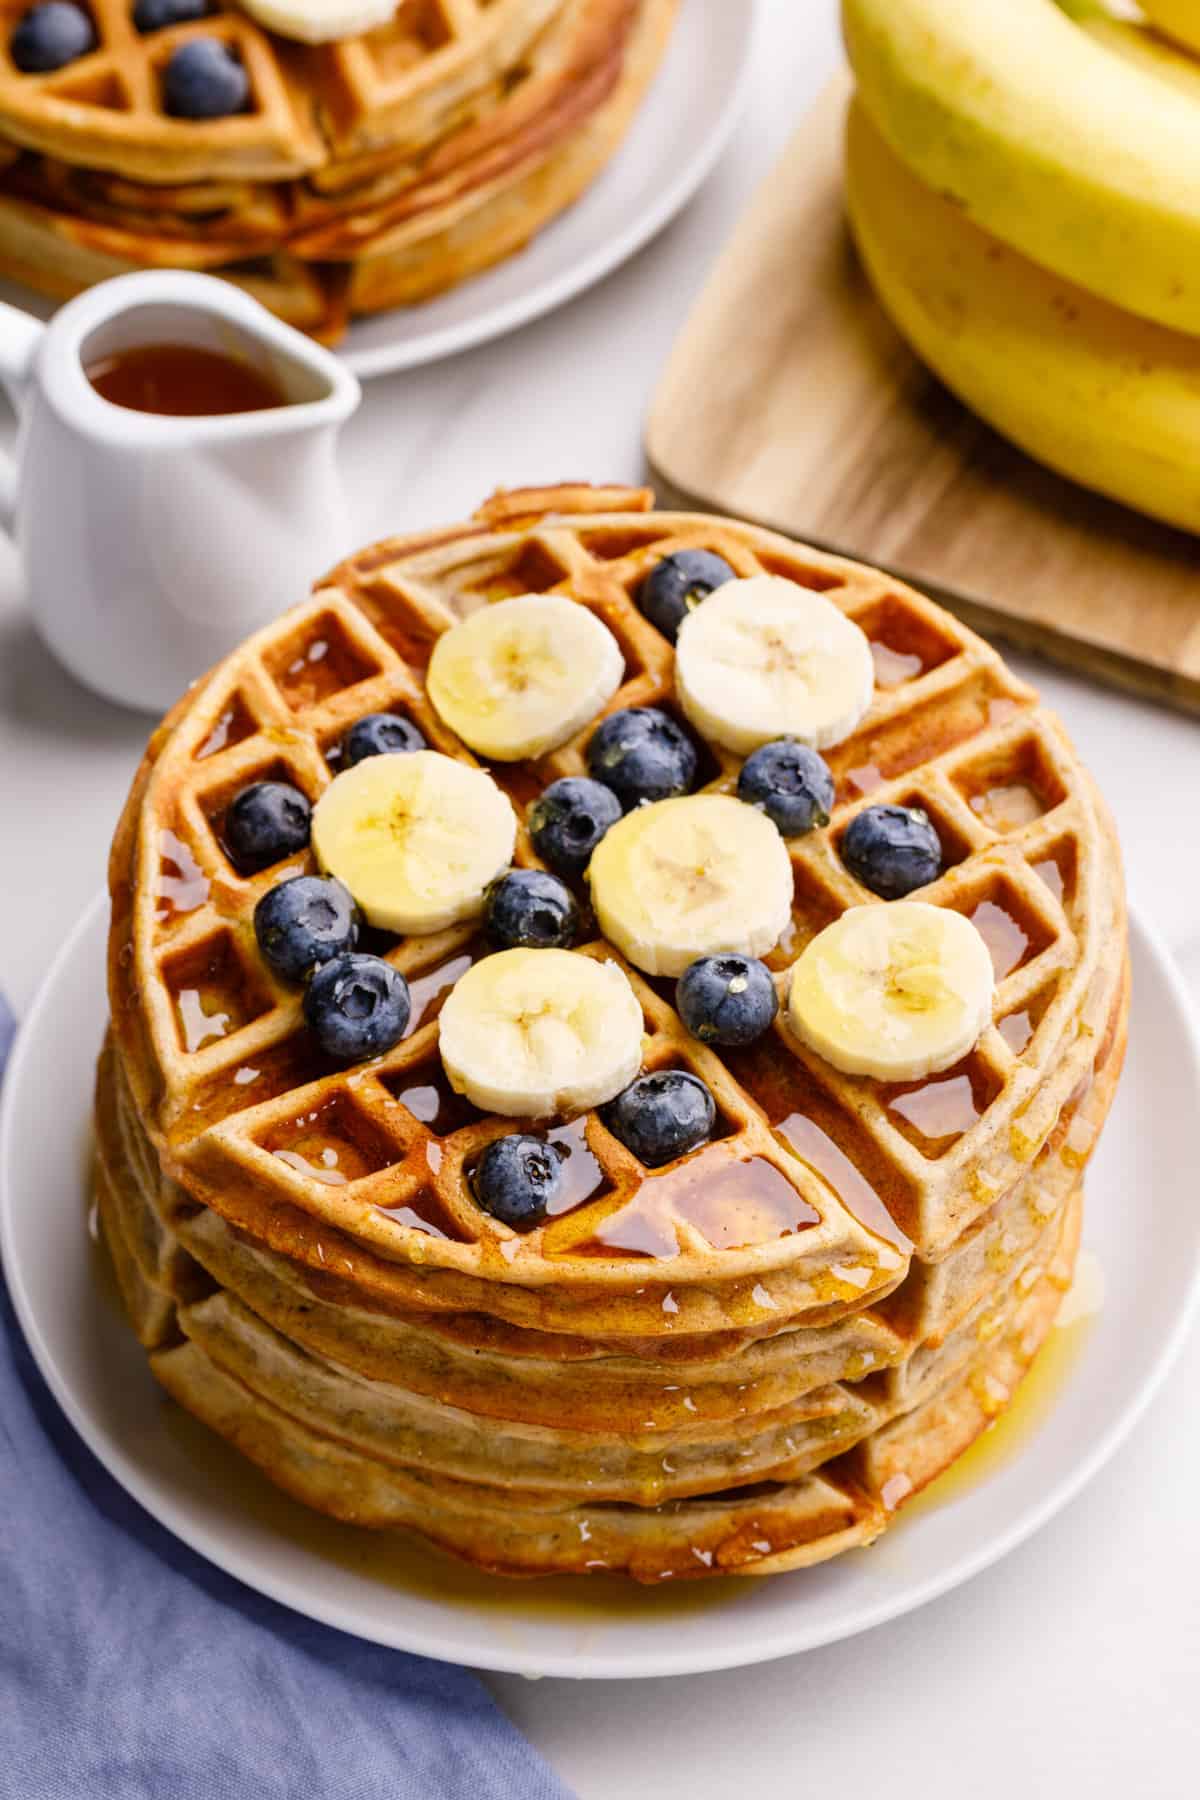 stack of four banana waffles topped with fresh blueberries, sliced bananas and syrup served on a white round plate